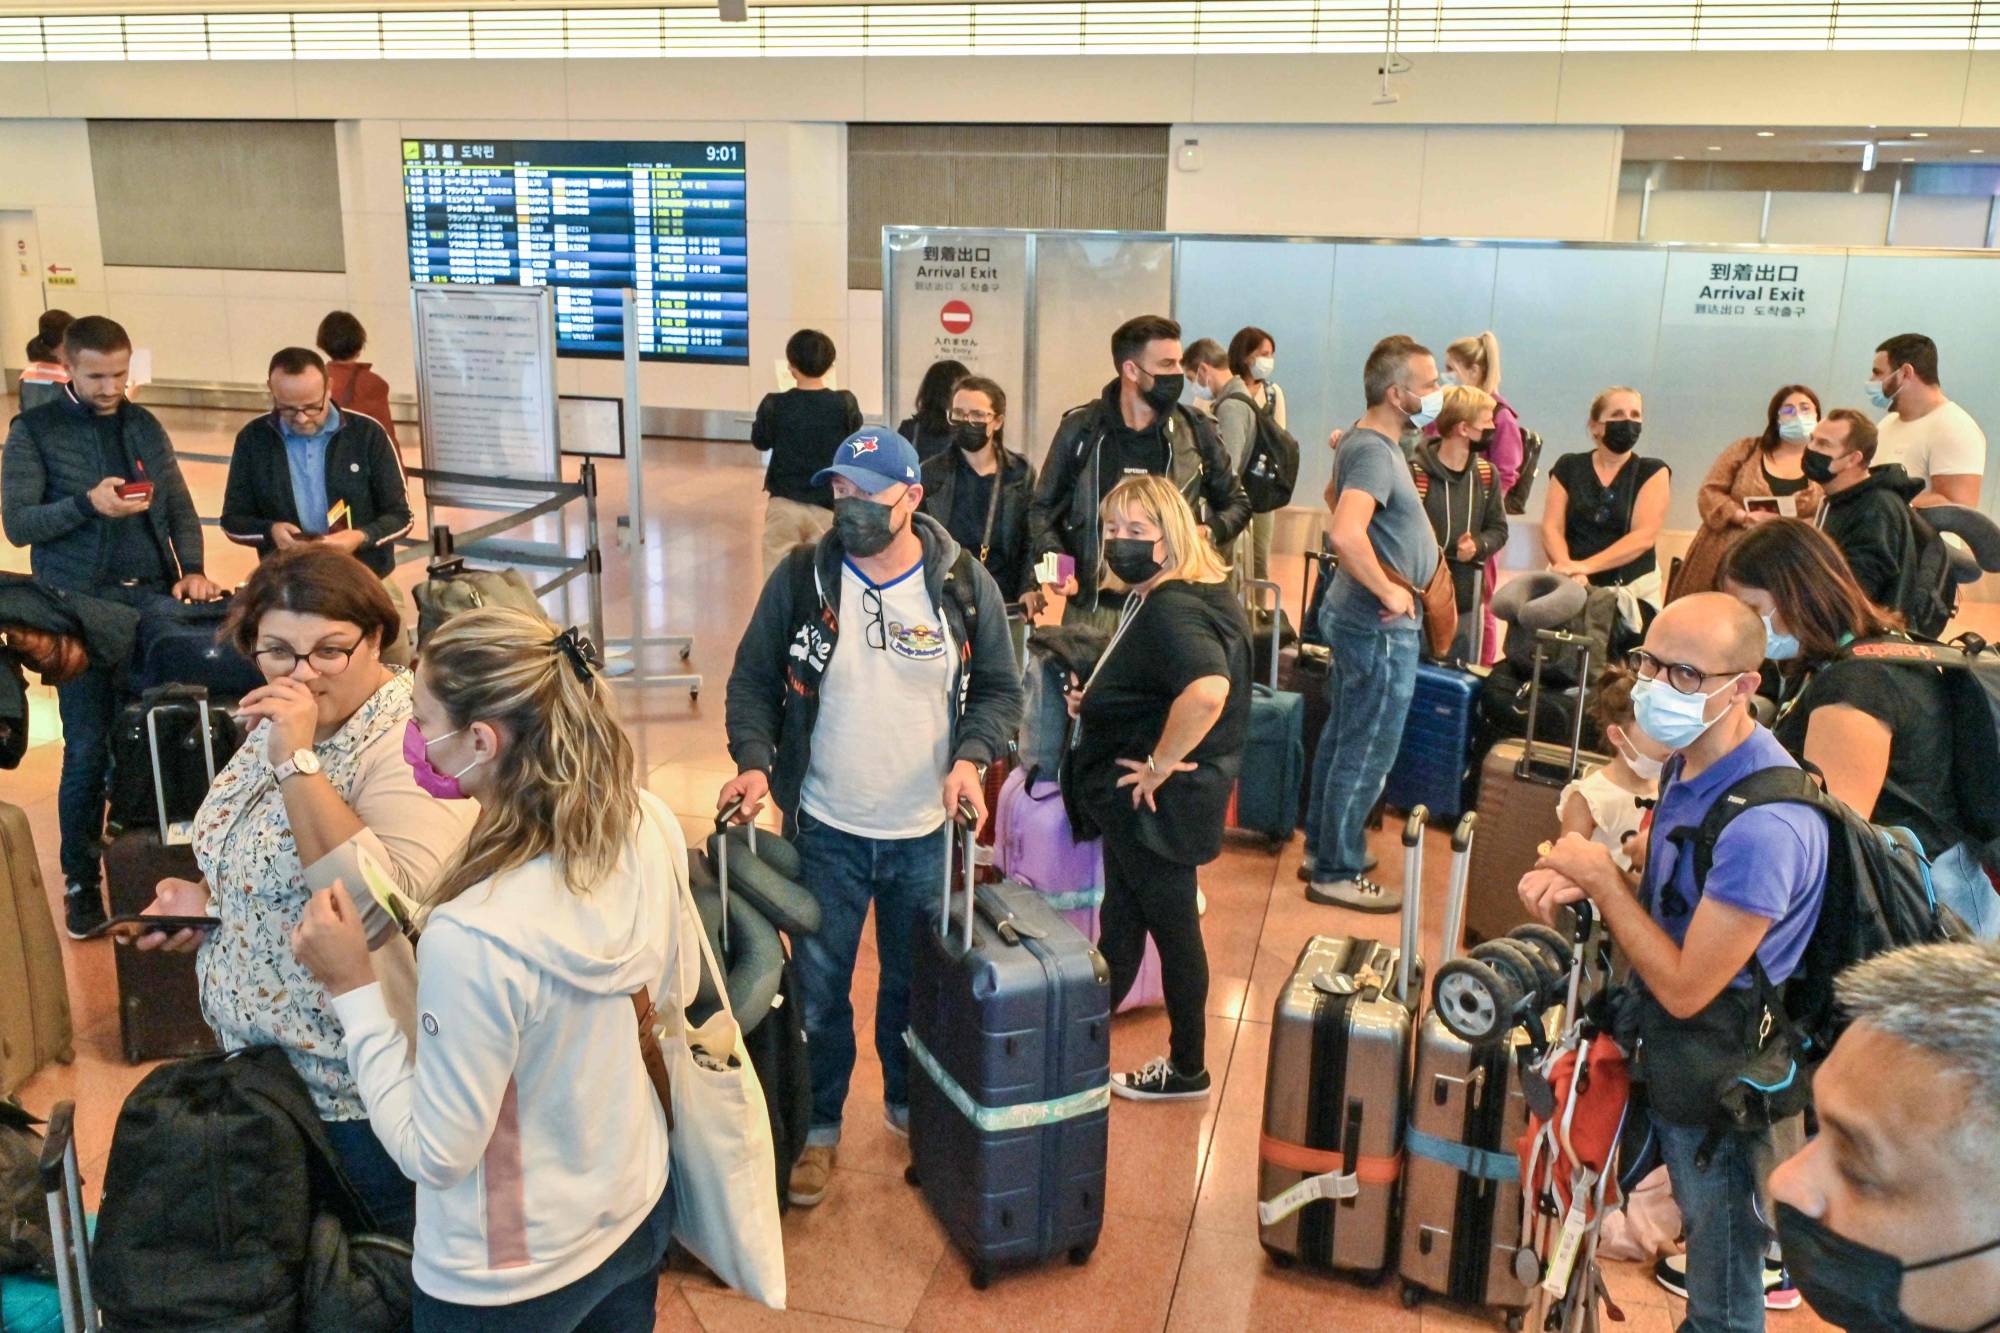 A group of tourists arrive at the international terminal of Tokyo's Haneda Airport on Tuesday, when Japan reopened to foreign independent travelers after two-and-a-half years of COVID-19 restrictions. | AFP-JIJI